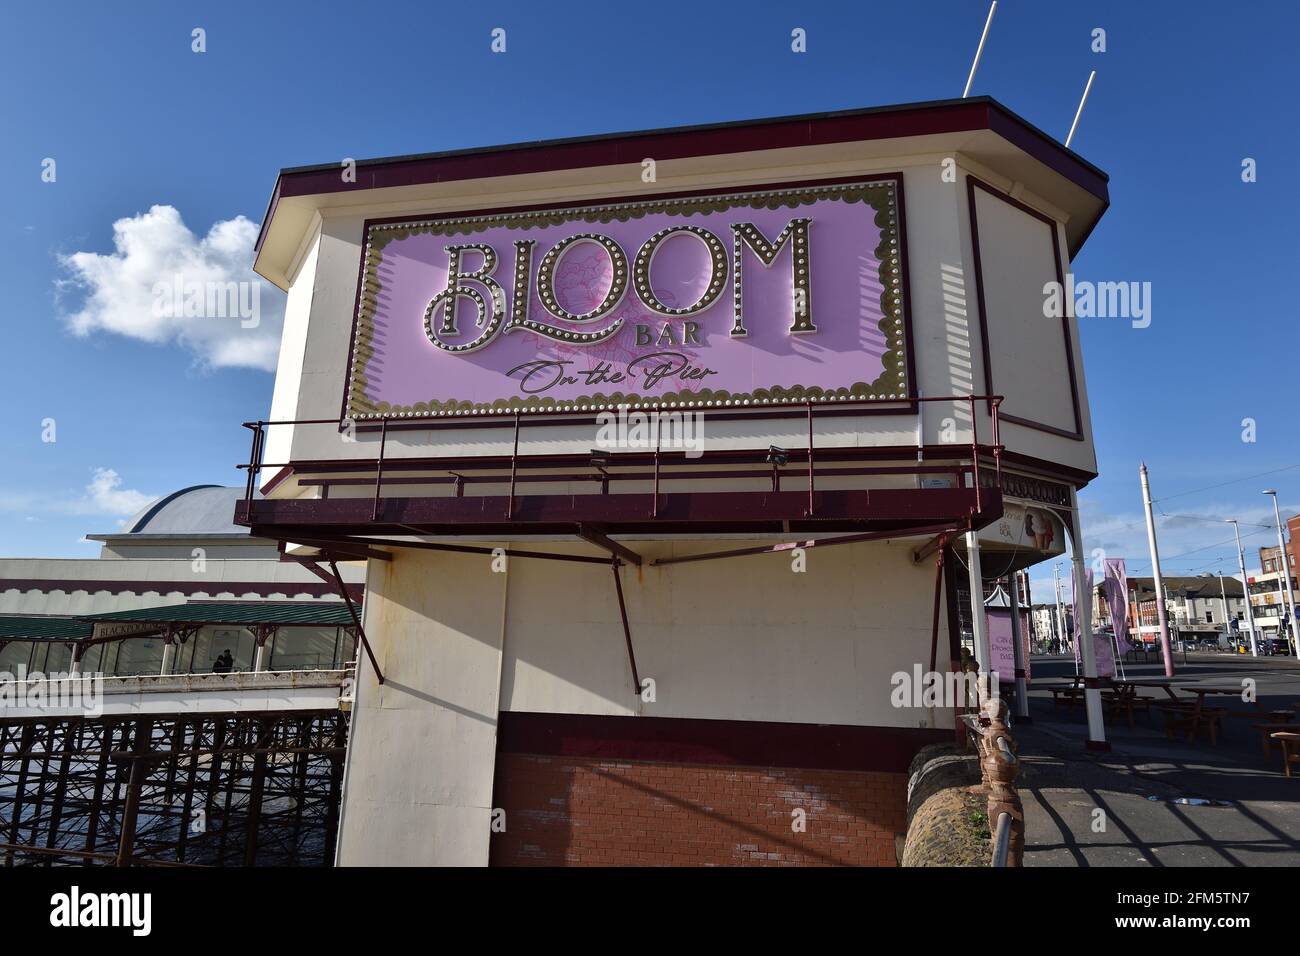 North Pier Blackpool Signage For The New Bloom Bar Located On The Pier Opened In 21 Stock Photo Alamy